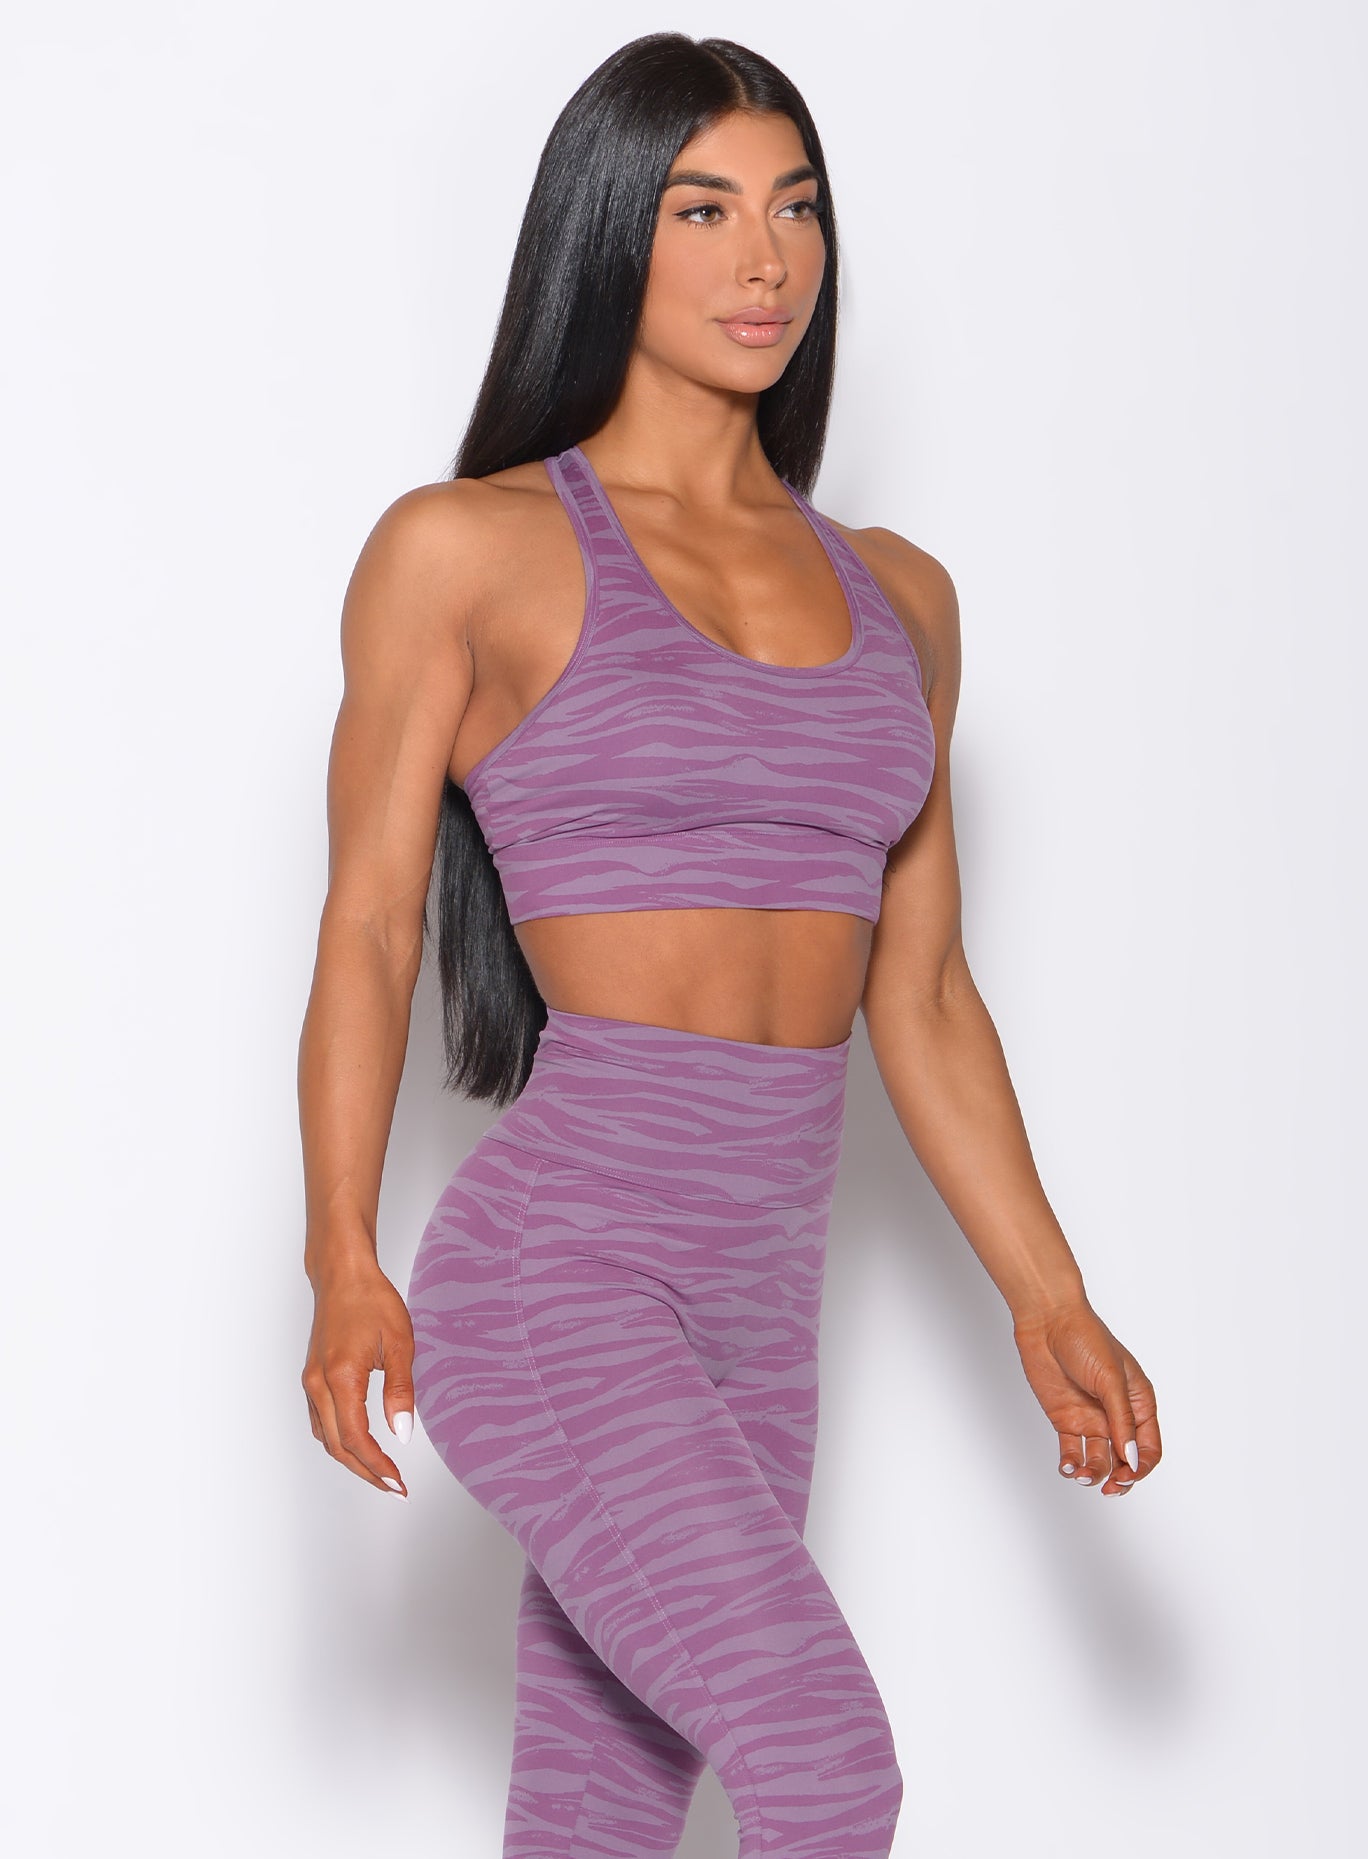 Right side  profile view of a model angled right wearing our tiger printed rival sports bra in orchid purple color and a matching sexy back leggings